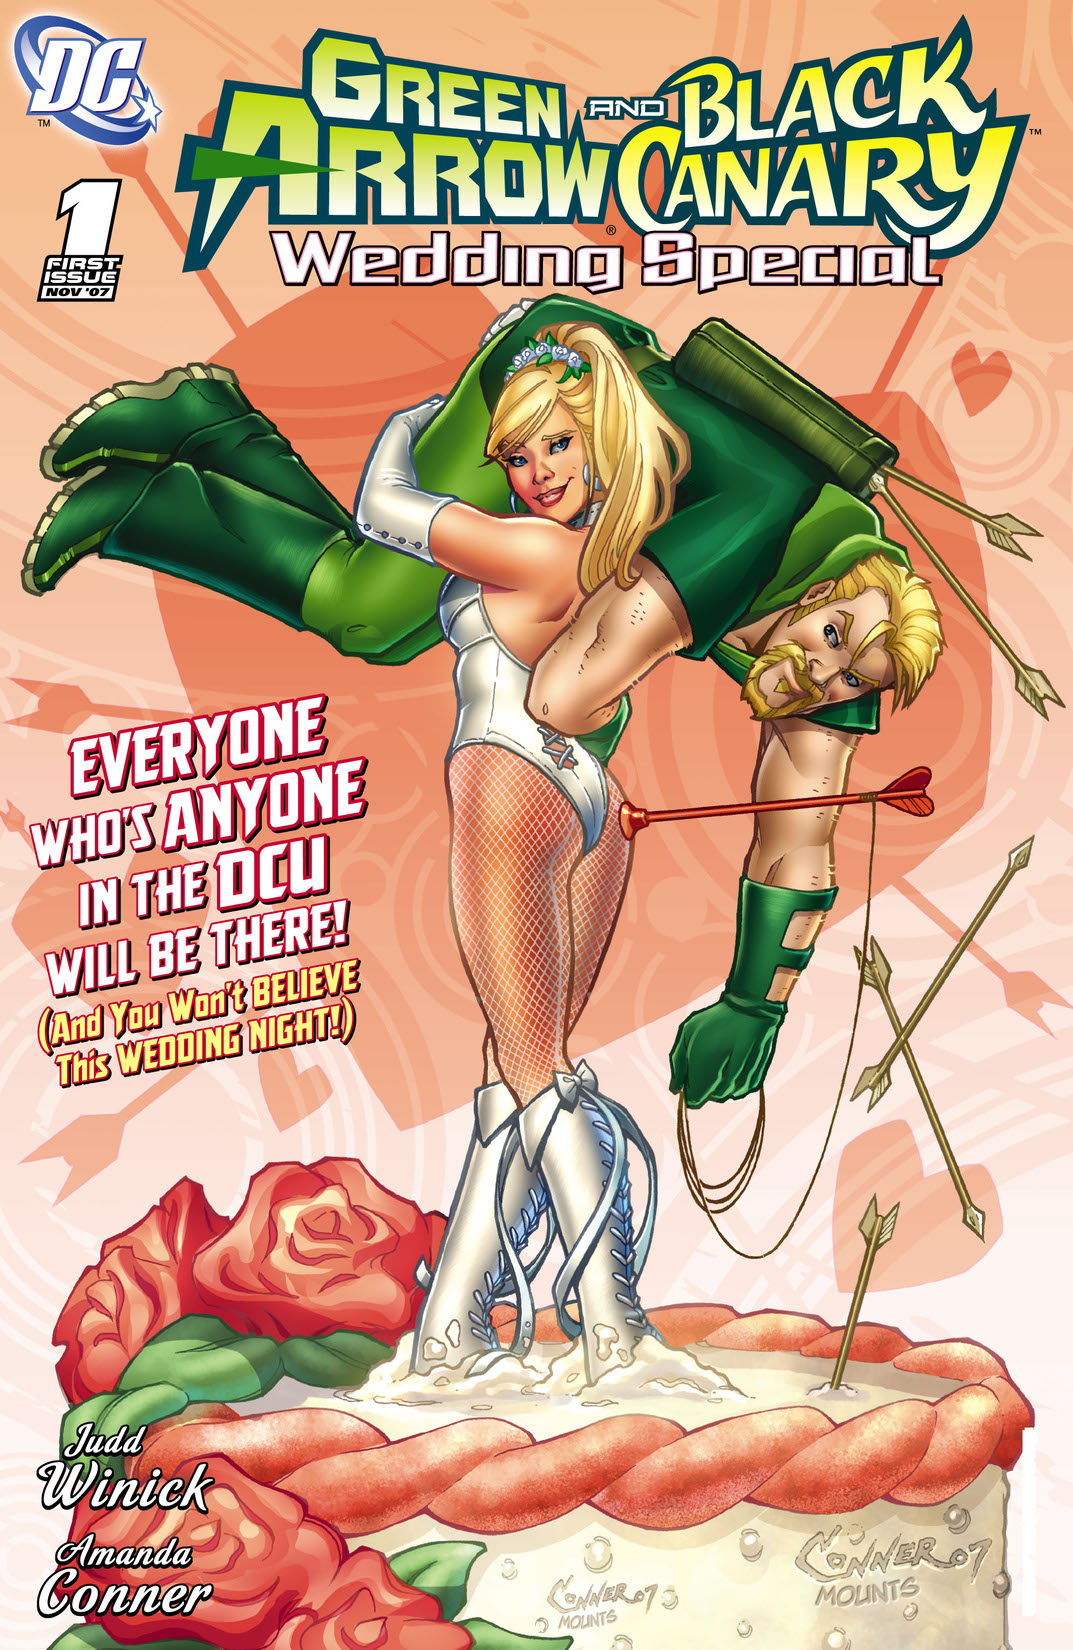 Green Arrow/Black Canary Wedding Special #1 preview images